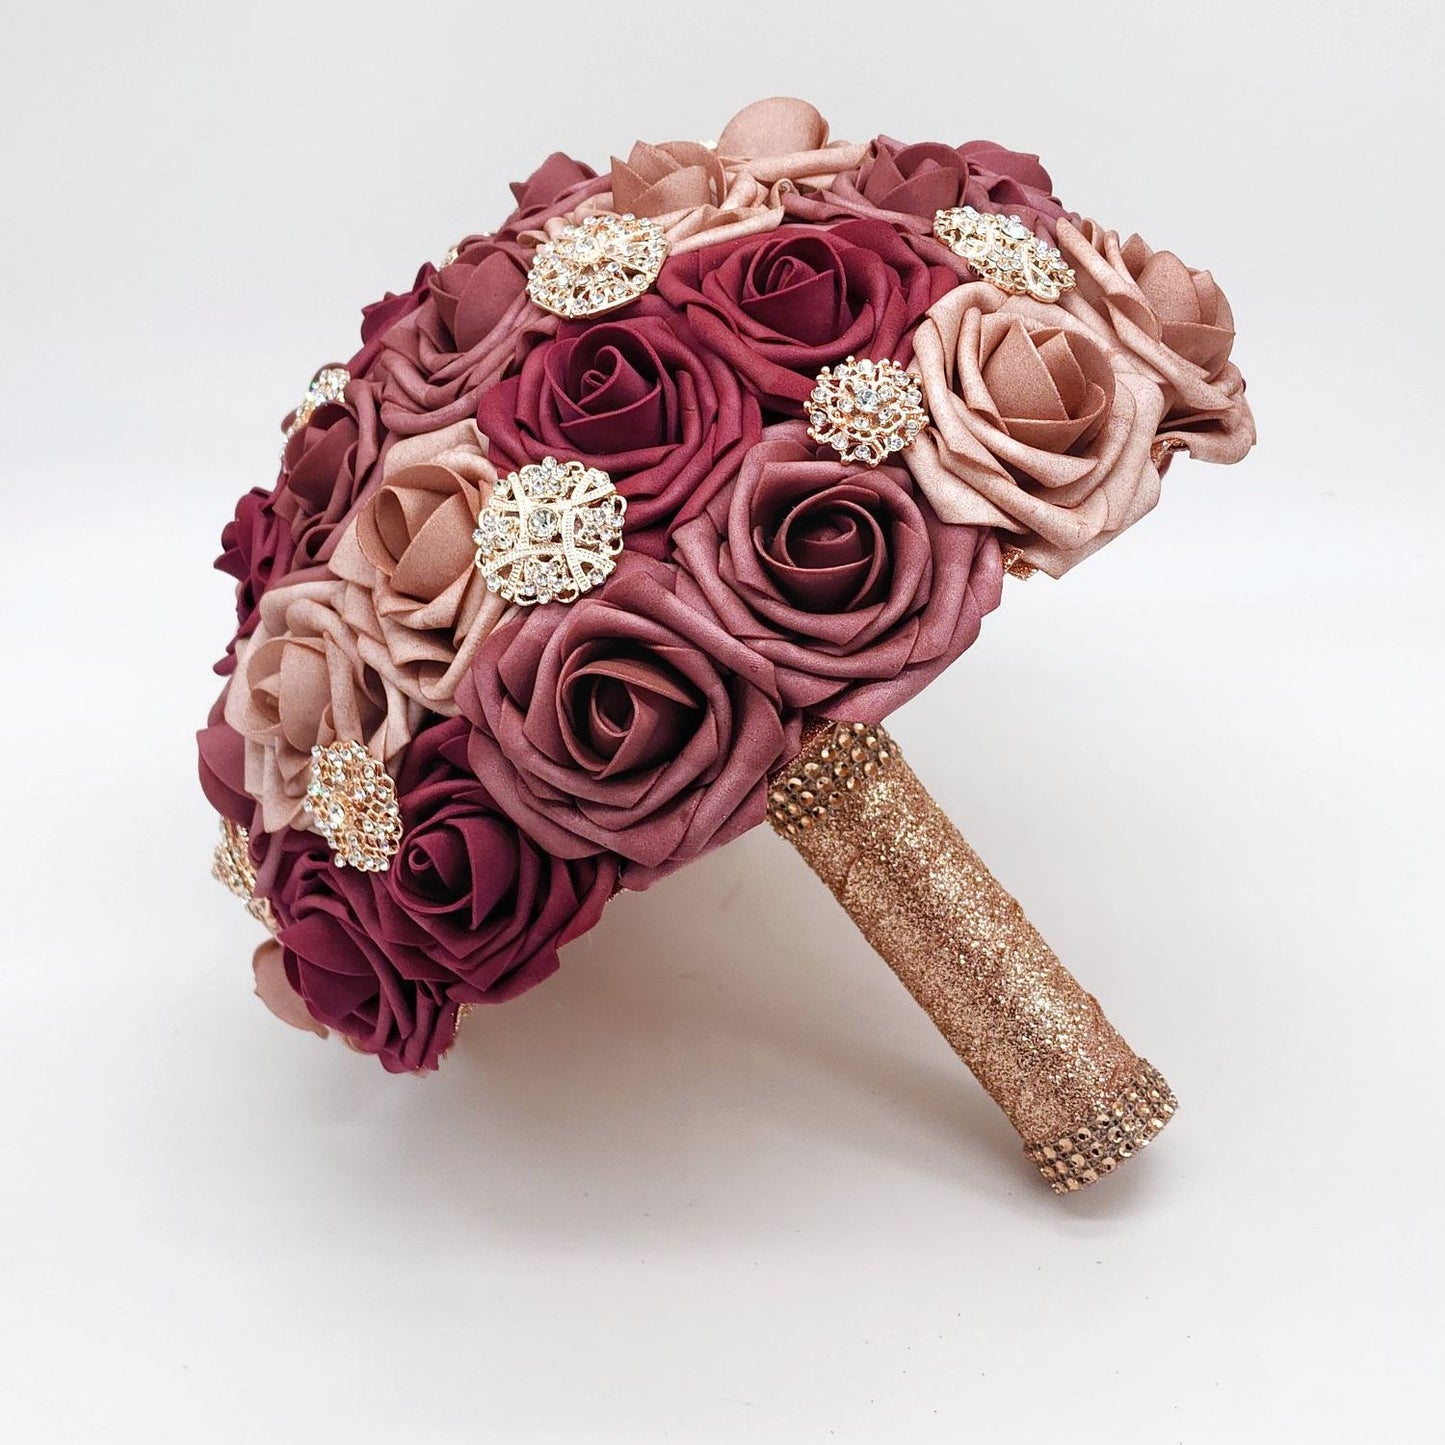 Dusty Rose, Burgundy, and Mauve Brooch Bridal Bouquet